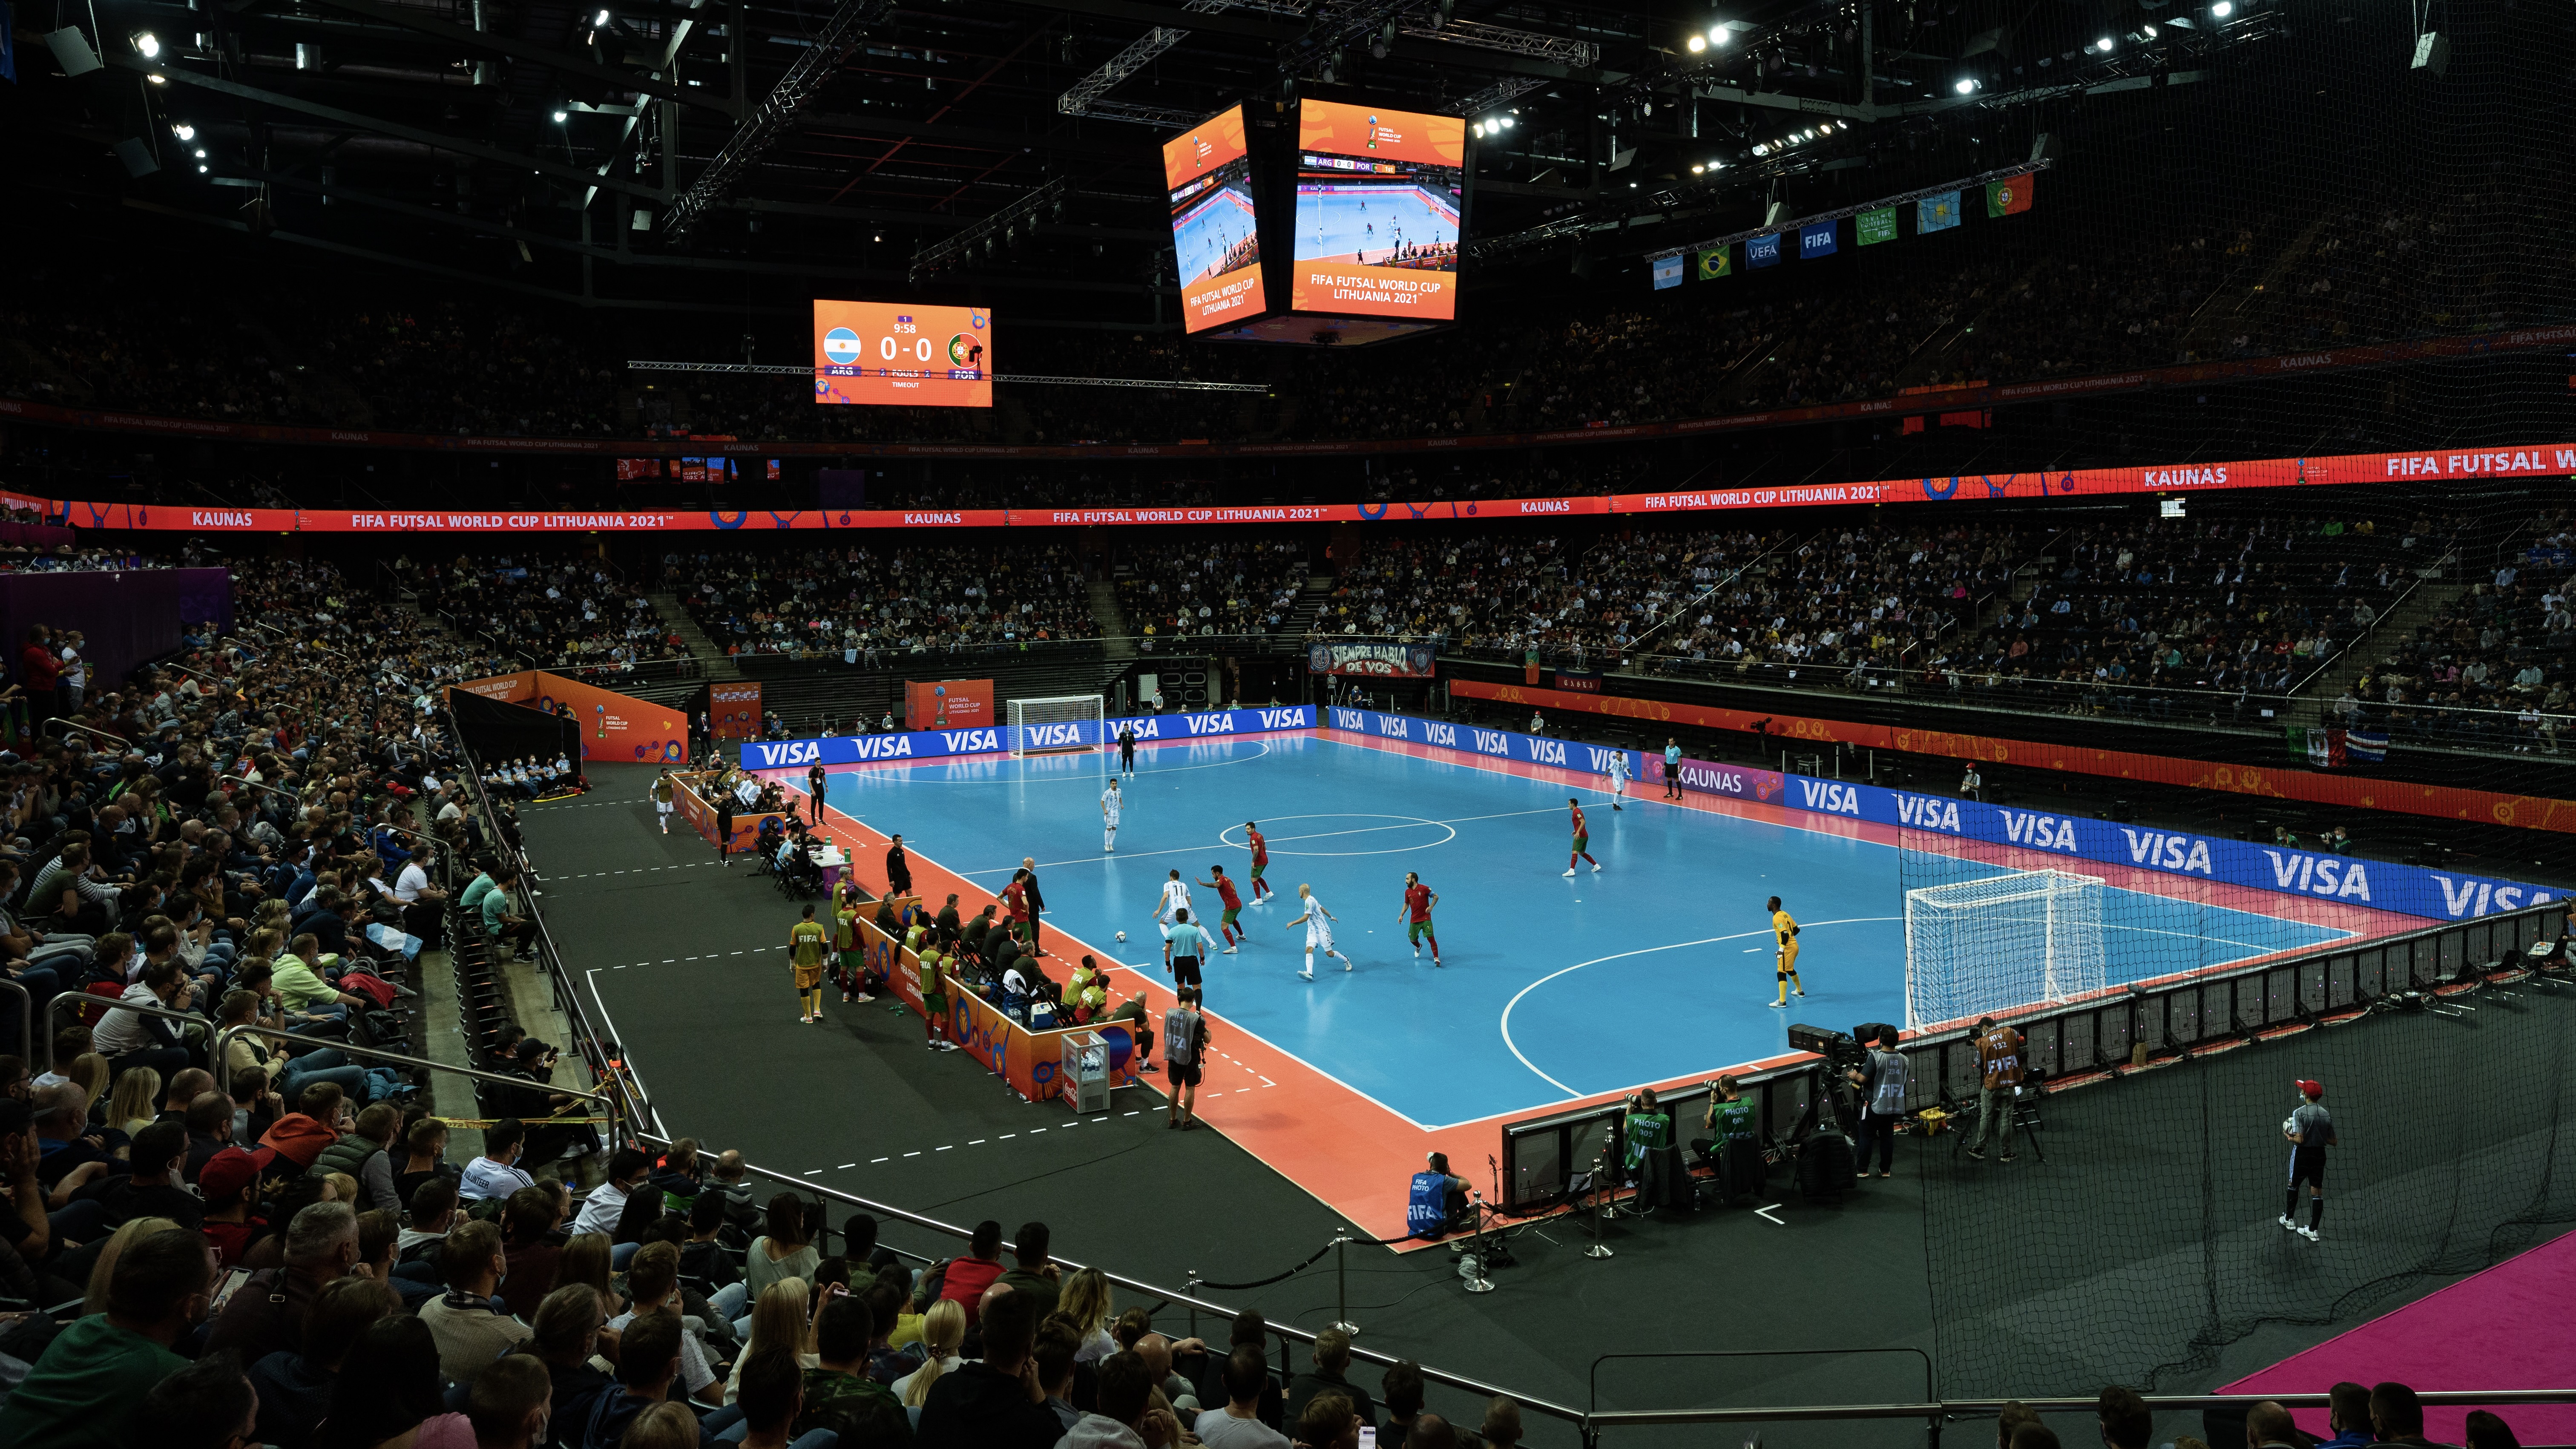 News: FIFA Futsal World Cup Lithuania 2021™ technical analysis now complete